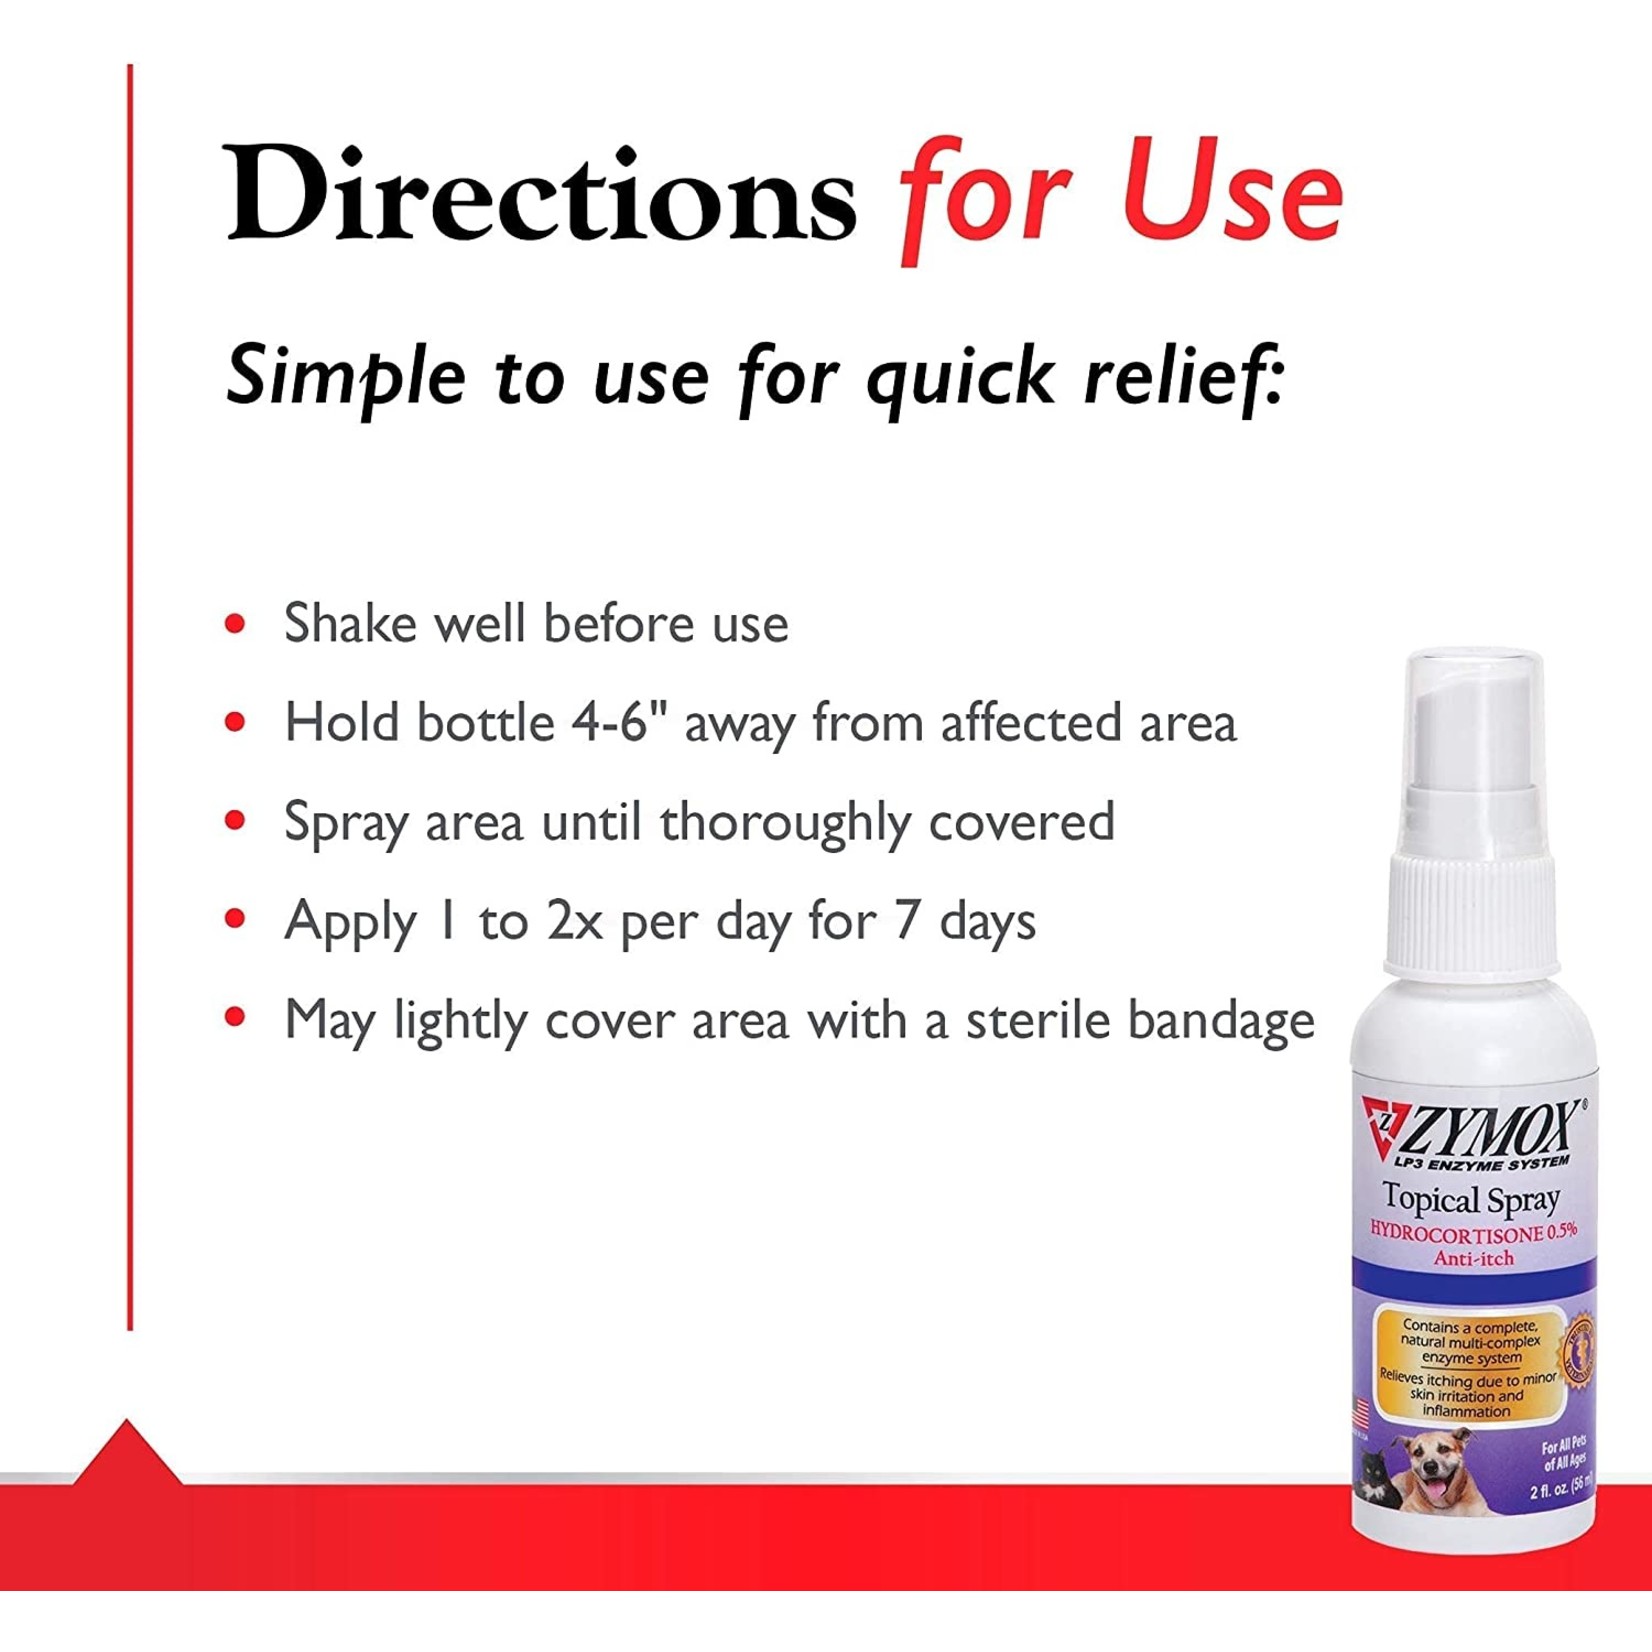 ZYMOX Zymox Topical Hot Spot Spray for Dogs and Cats with .5% Hydrocortisone, 2oz